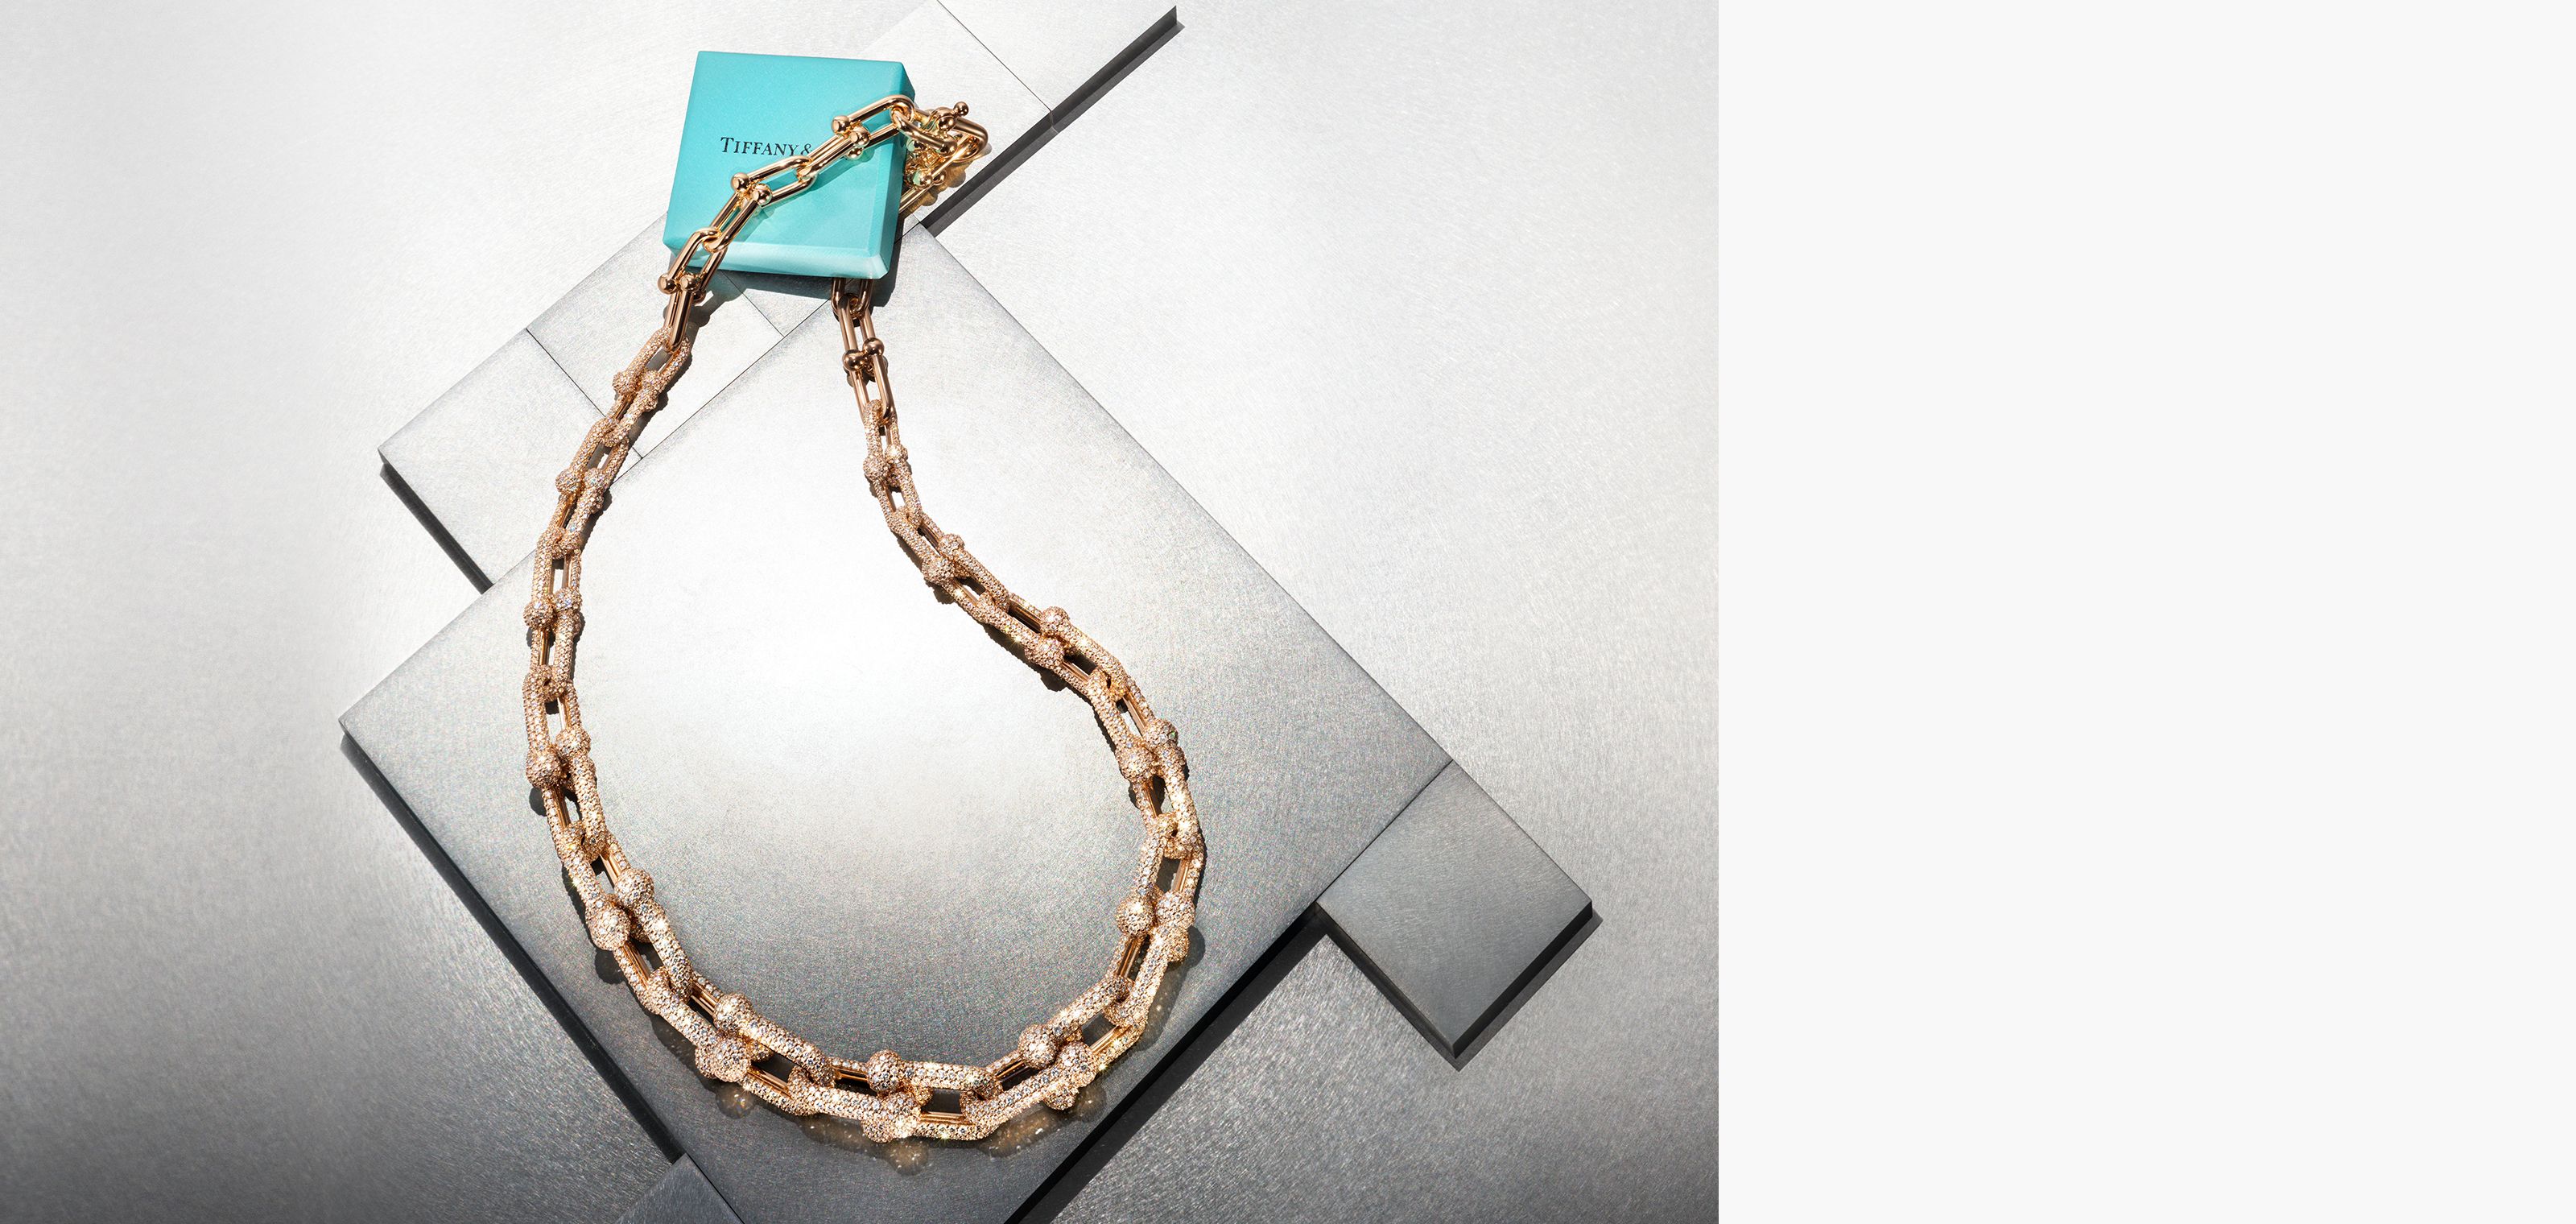 Tiffany Hardwear Small Link Necklace in Rose Gold, Size: 18 in.